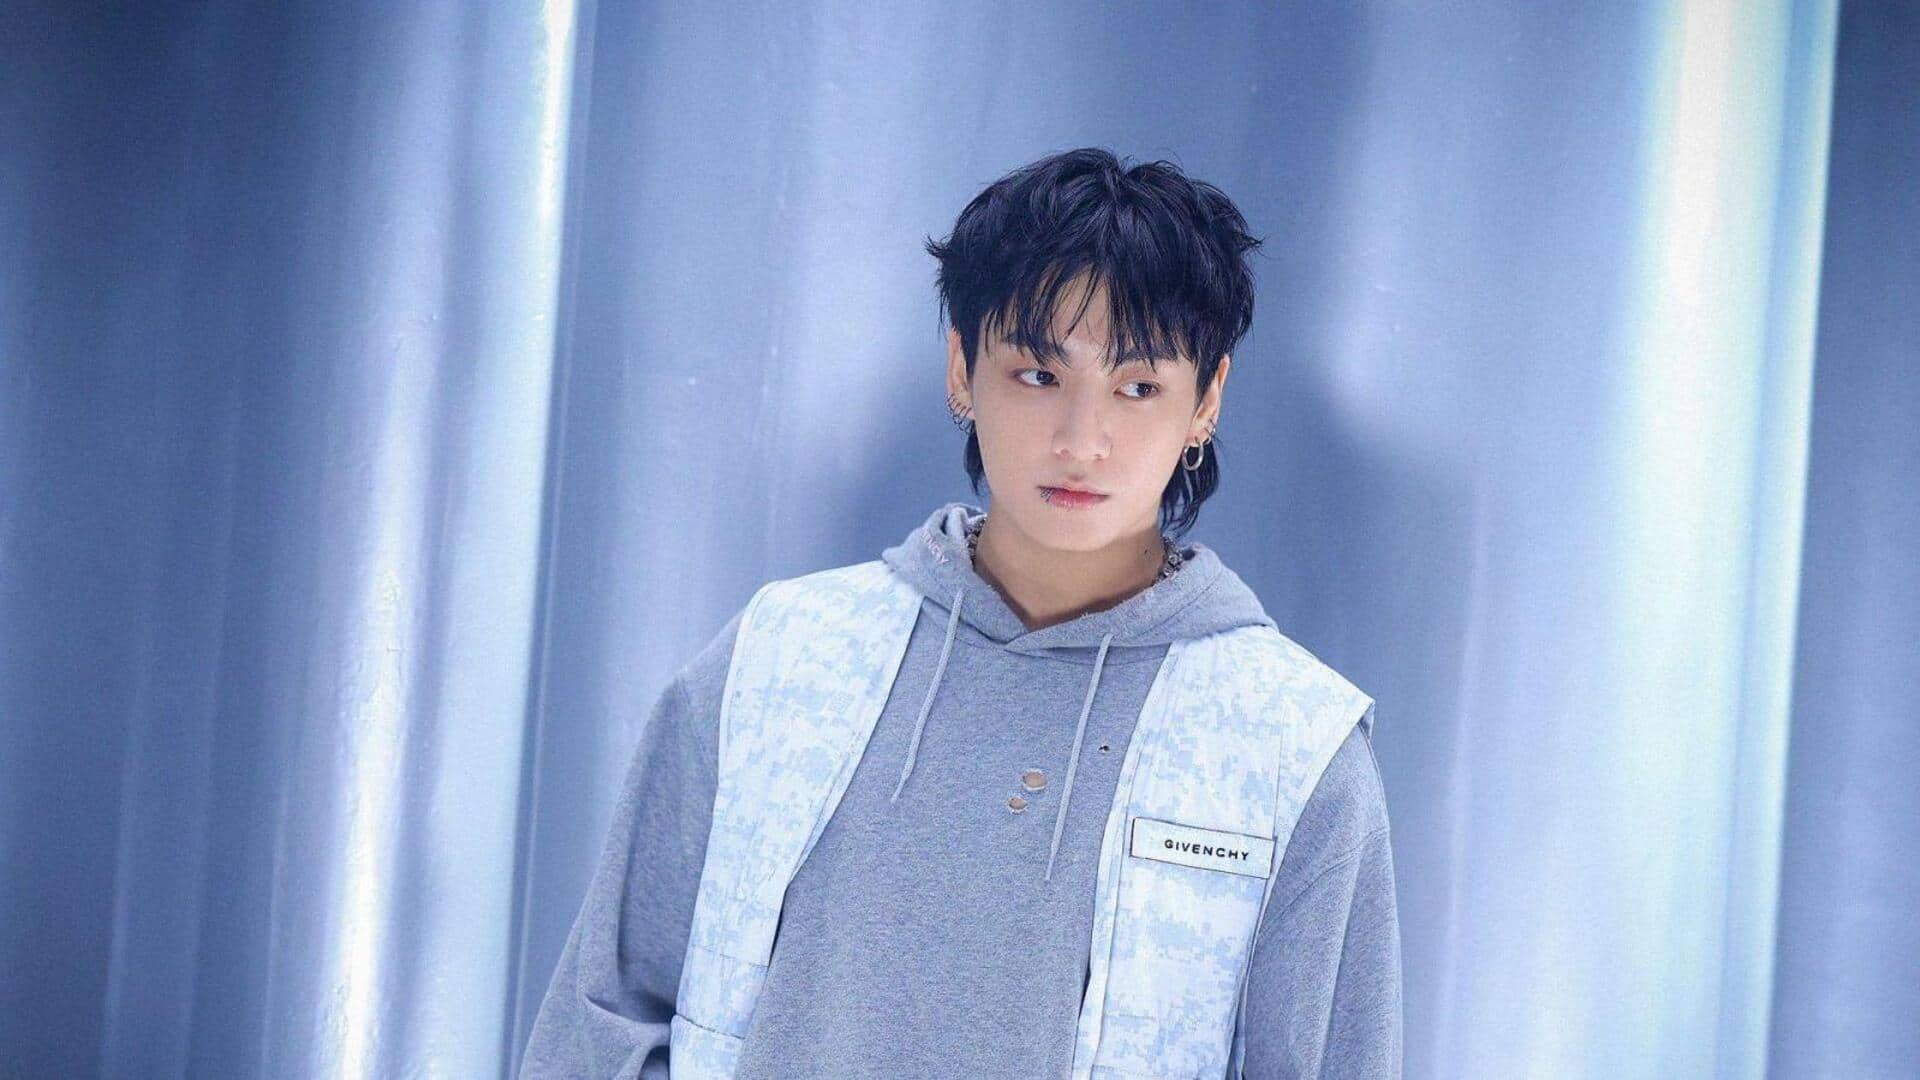 BTS's Jungkook's world tour in works? Here's what we know